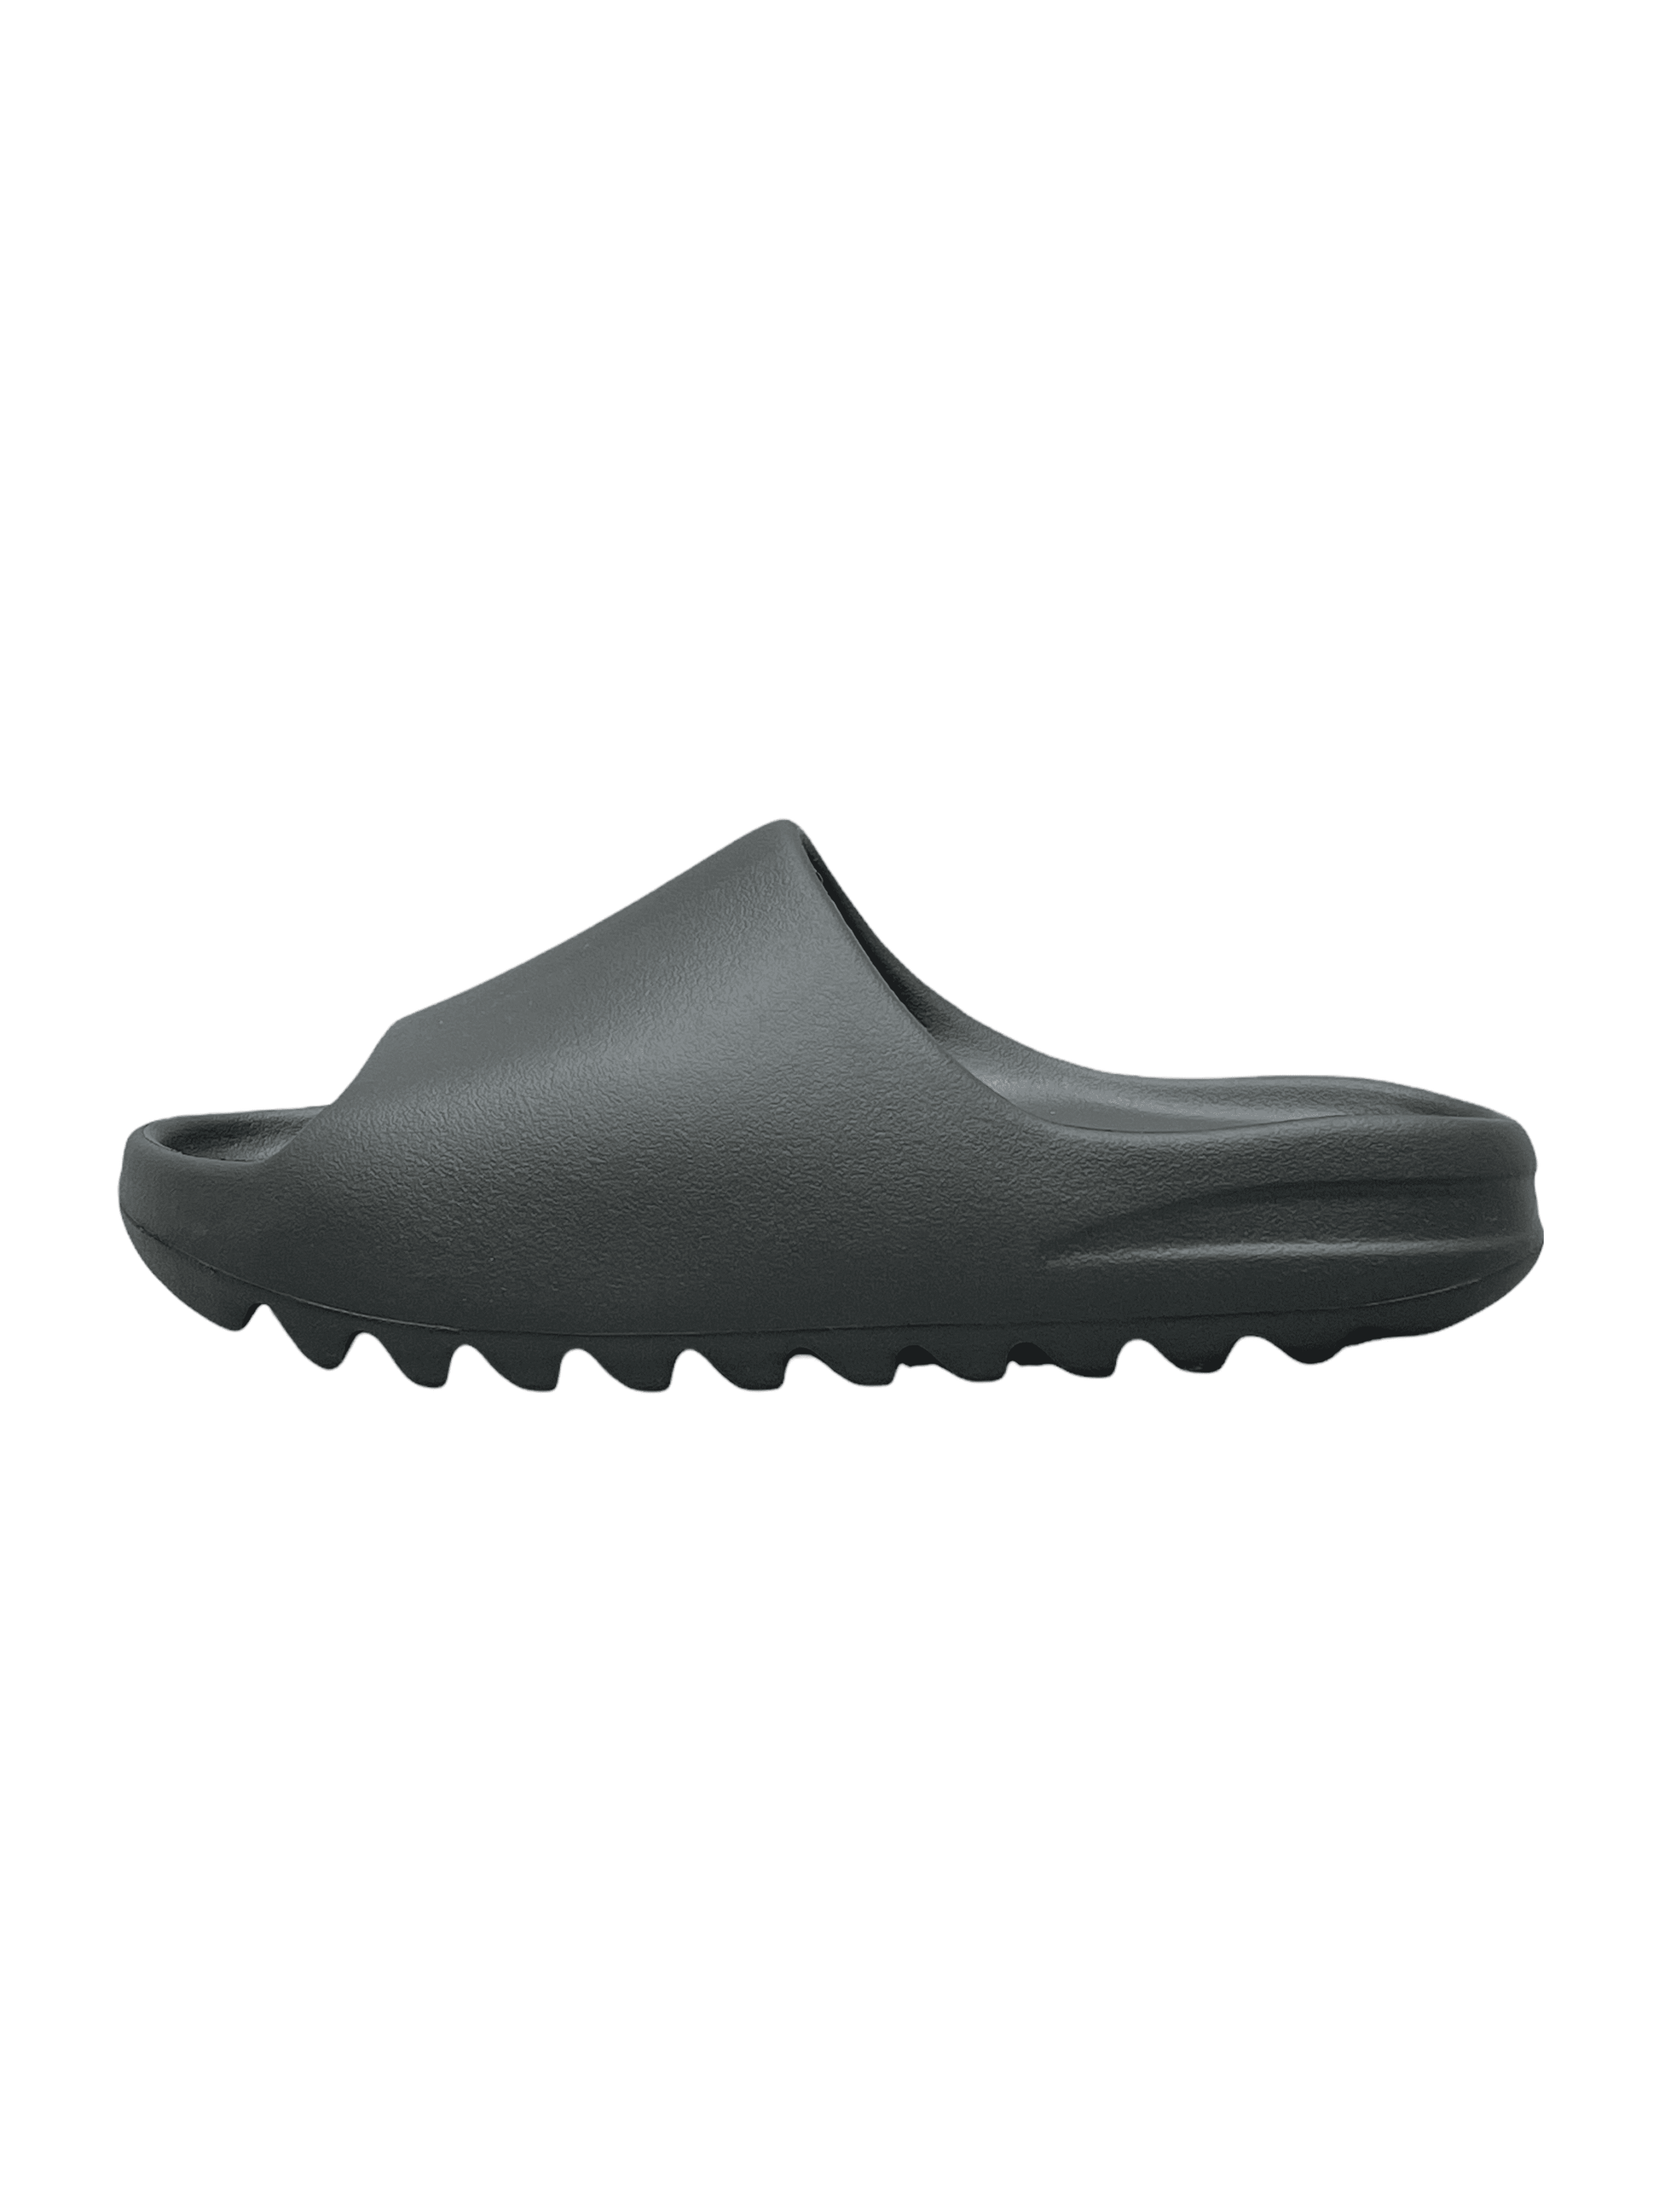 Adidas Yeezy Slide Onyx - Genuine Design Luxury Consignment for Men. New & Pre-Owned Clothing, Shoes, & Accessories. Calgary, Canada